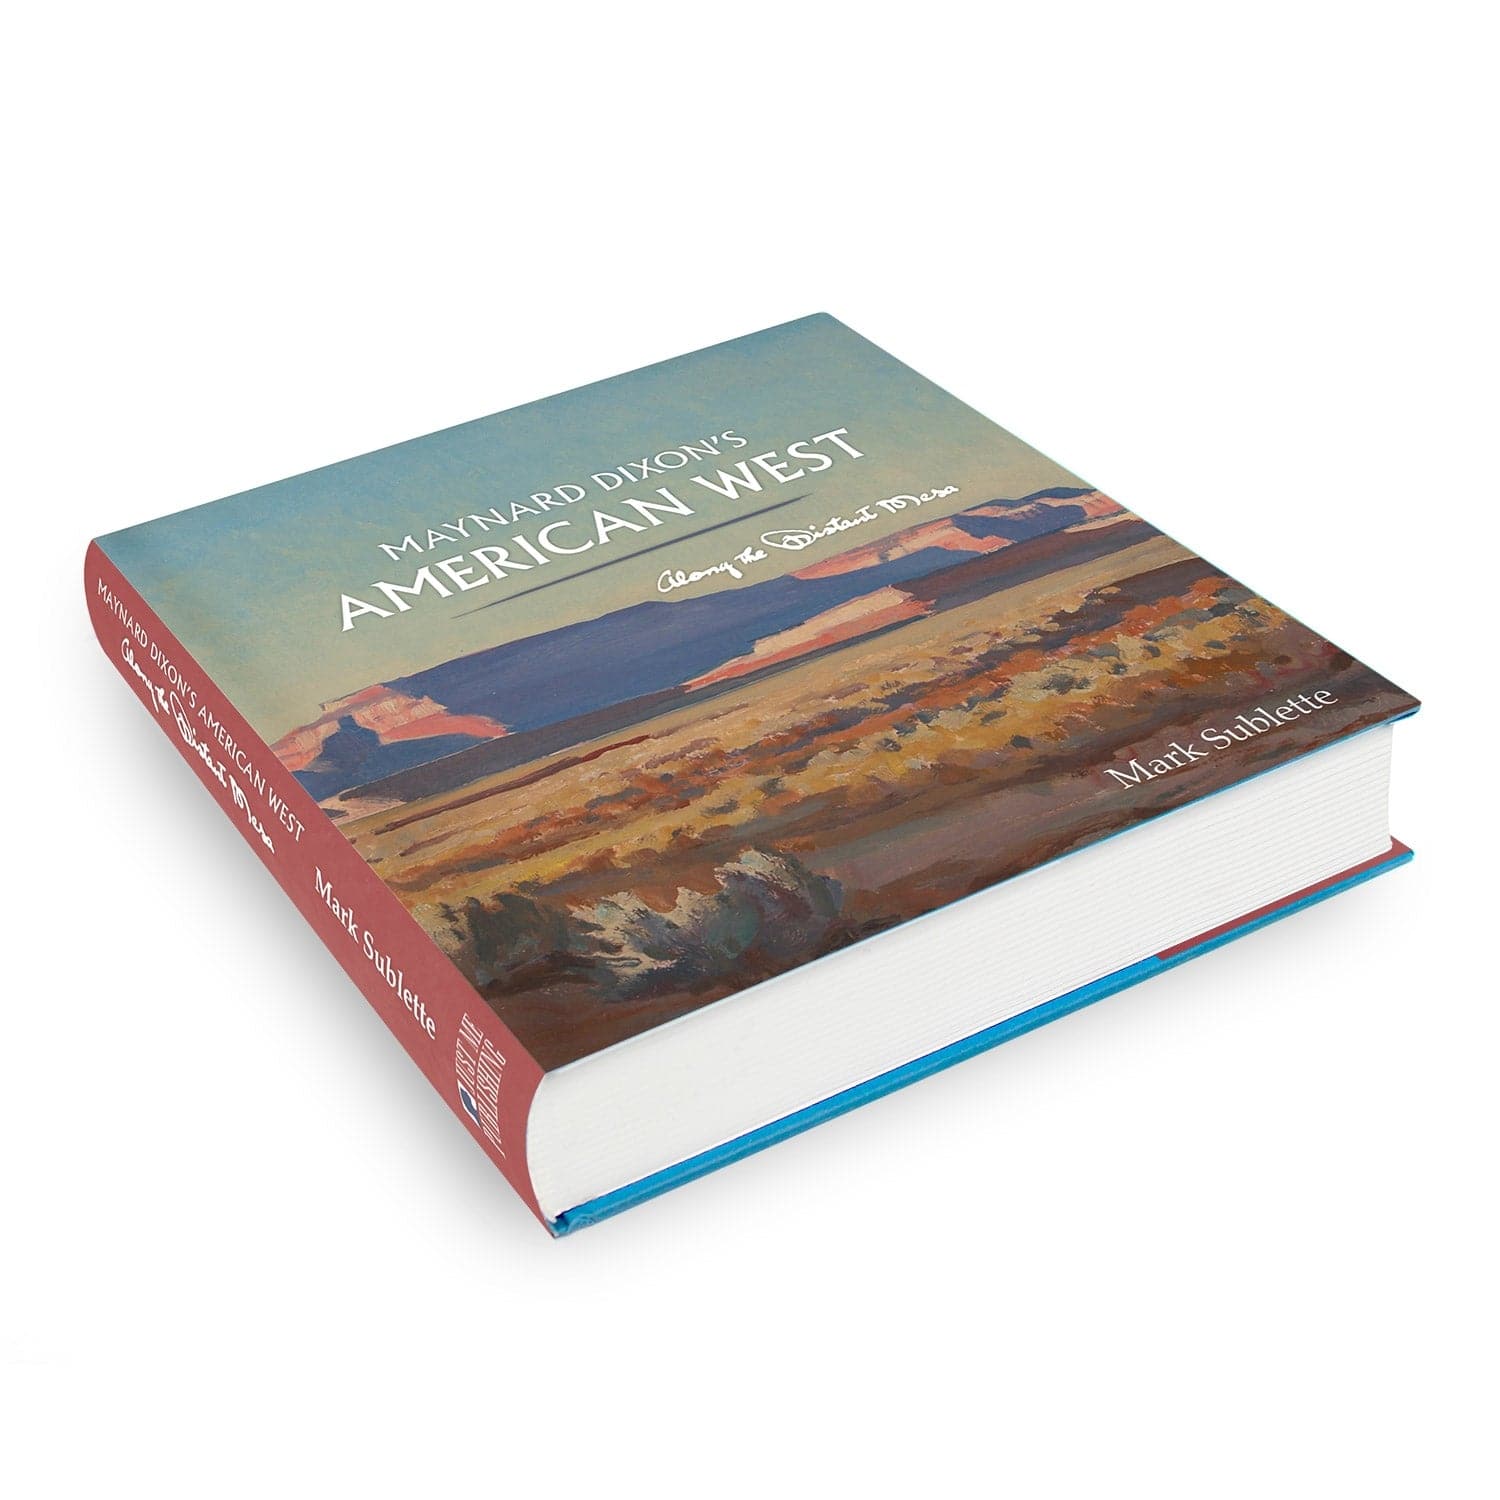 *Maynard Dixon's American West: Along the Distant Mesa by Mark Sublette (sealed in protective plastic cover from the publisher) - ALMOST SOLD OUT (For a signed copy by author, please request signed copy at checkout)